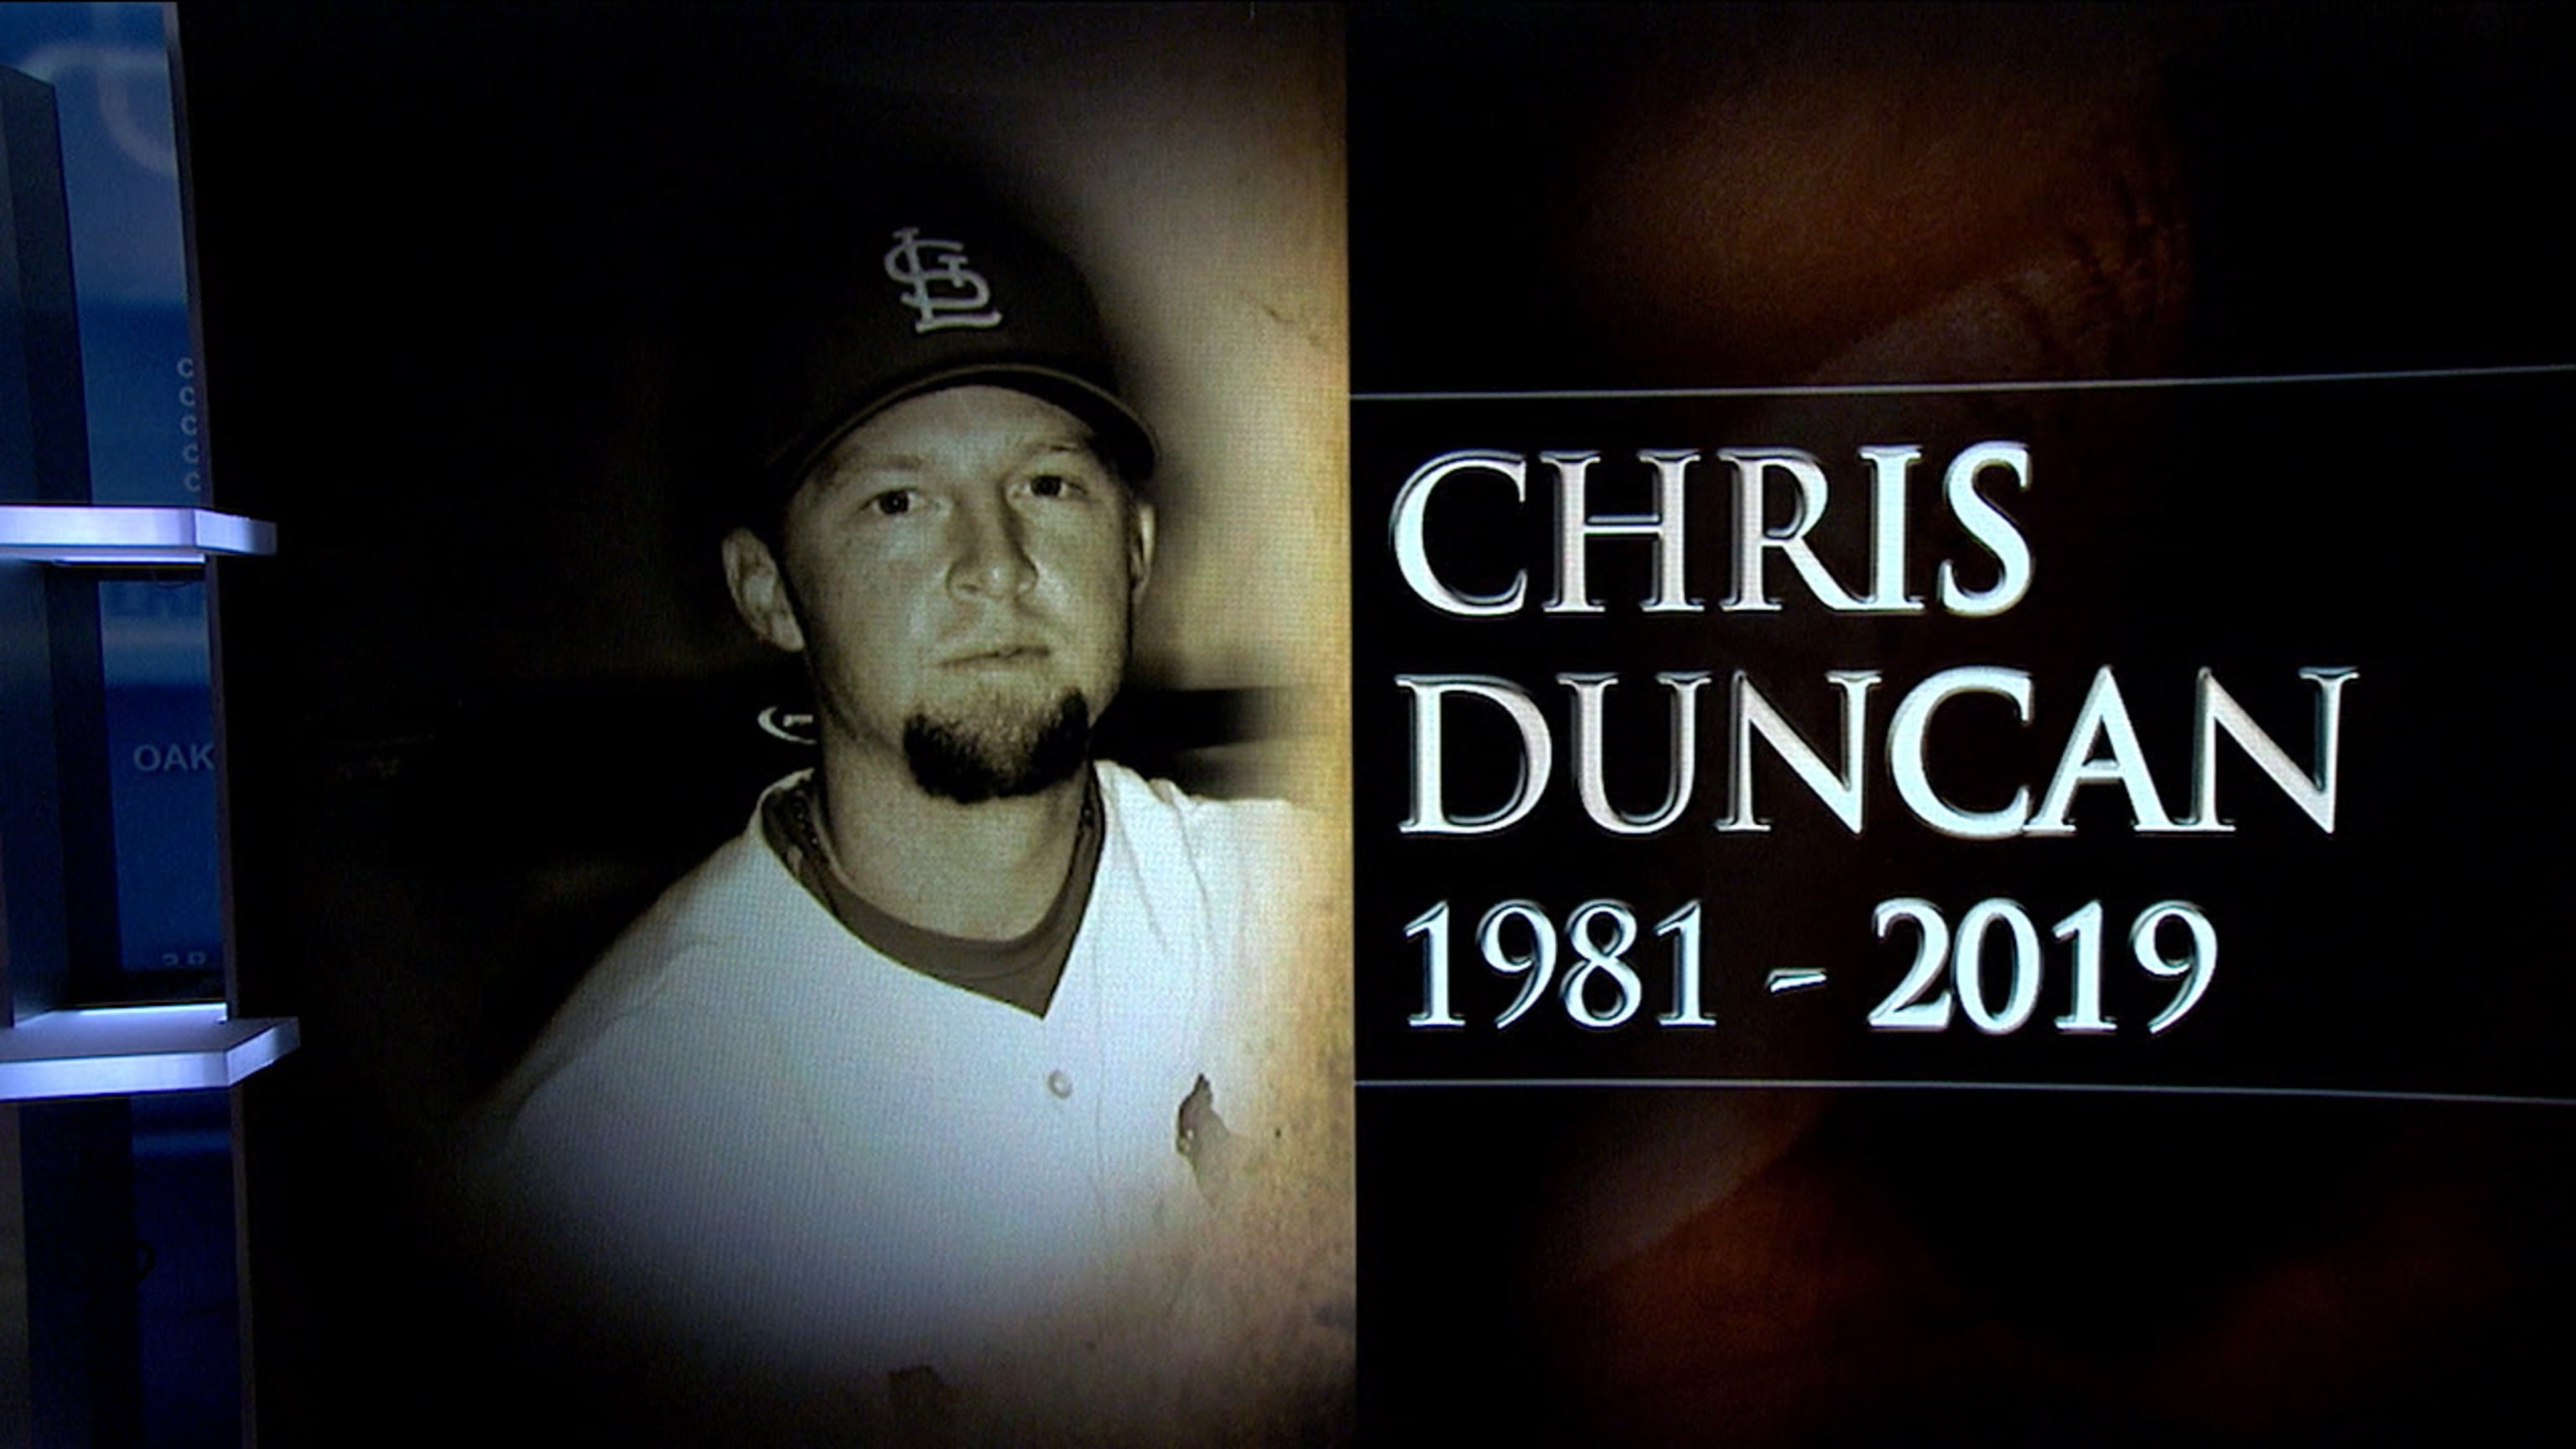 Prayers out to the @cardinals family tonight! One of the greatest